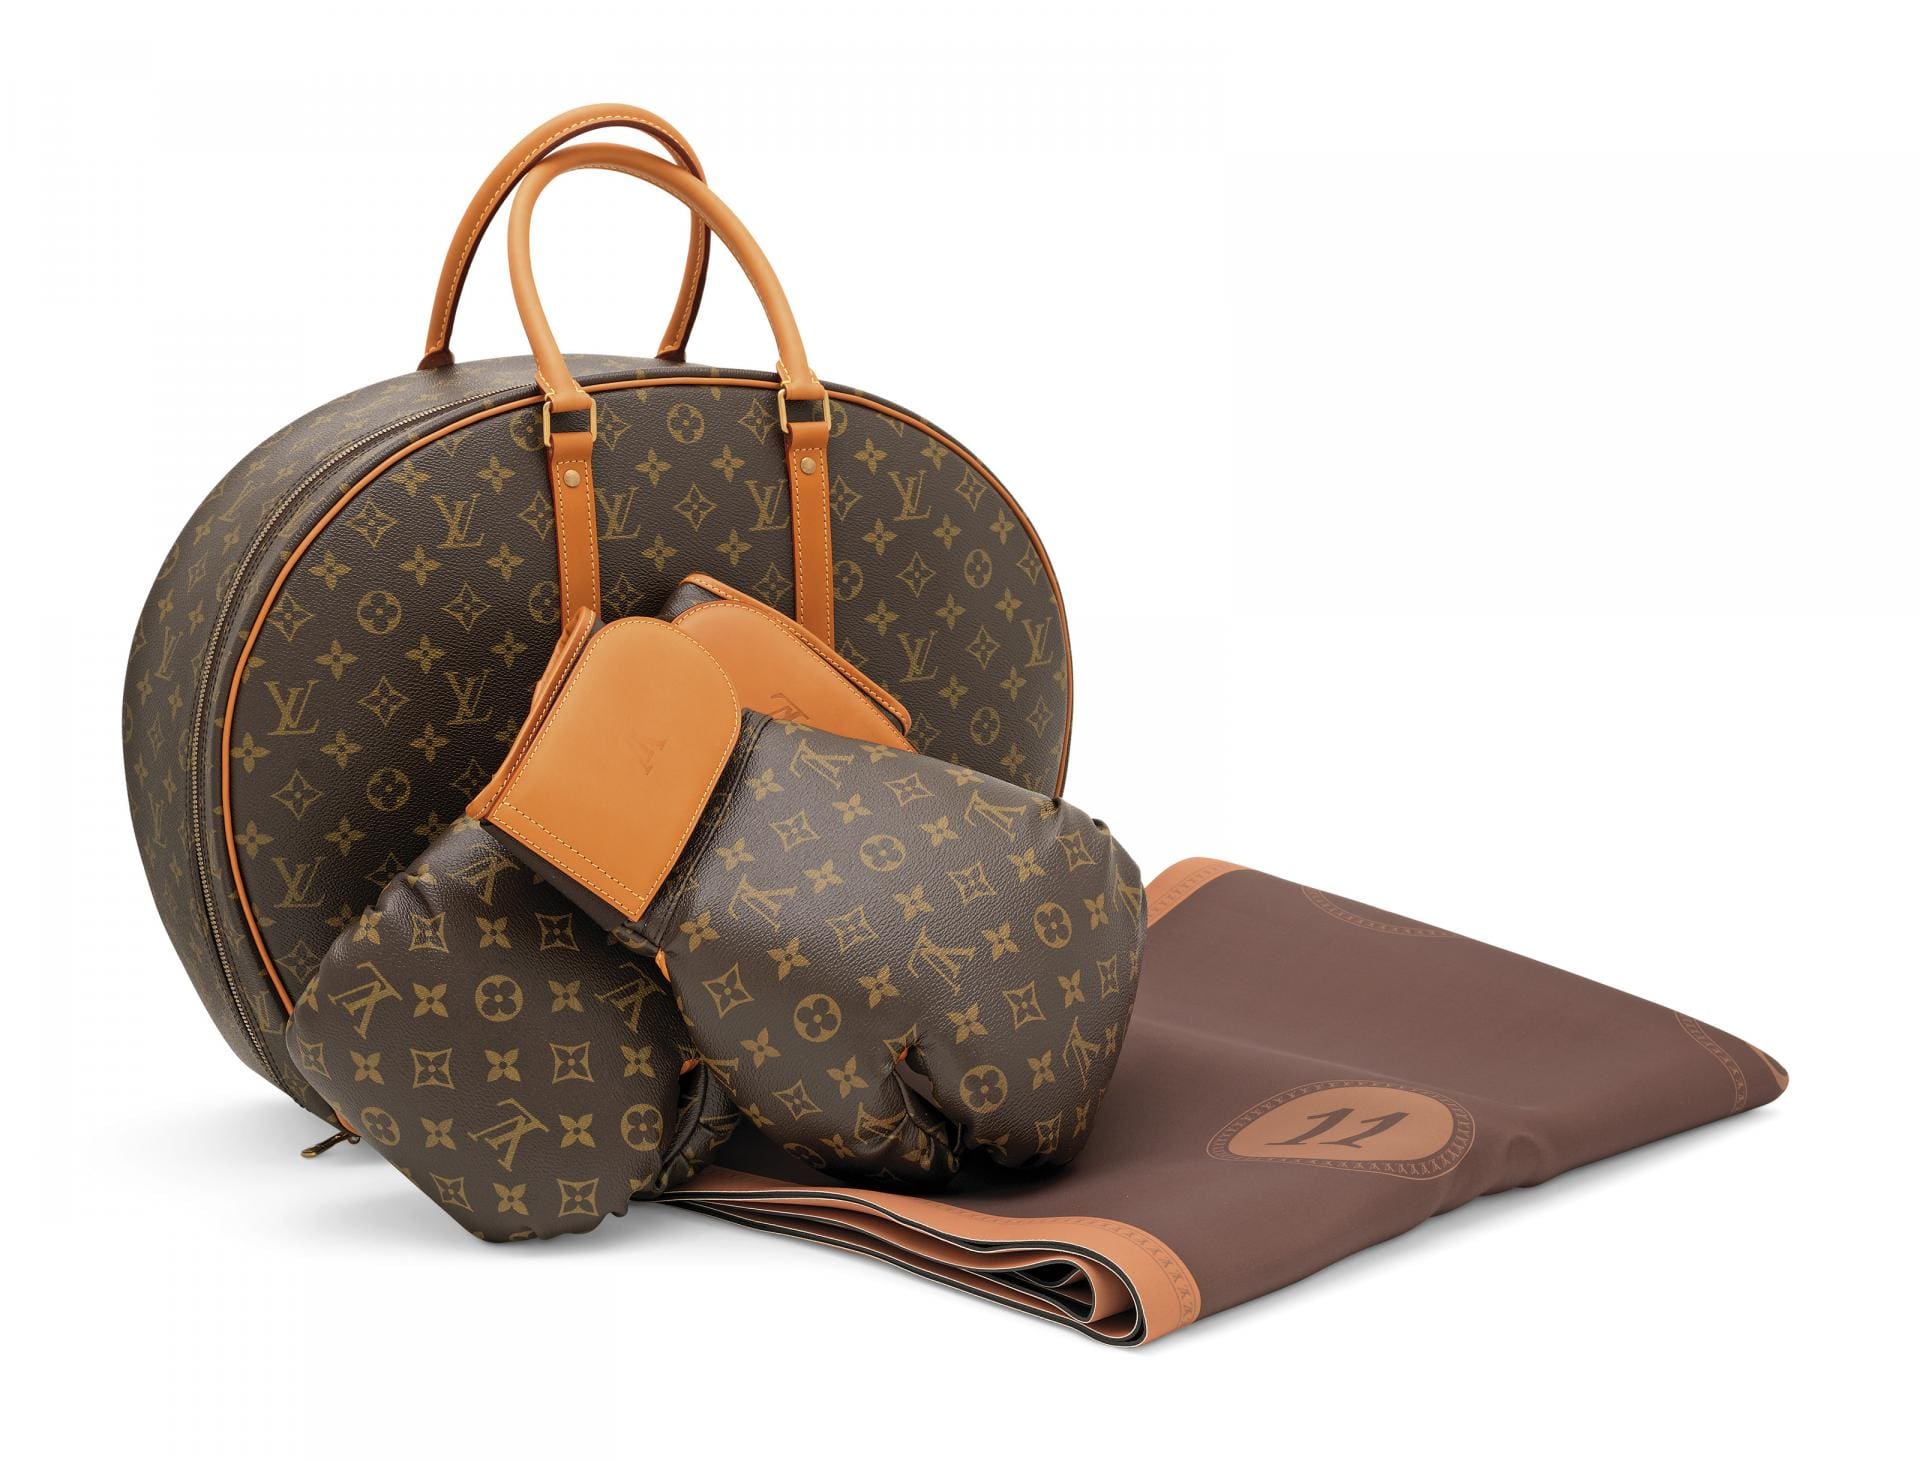 Chanel, Hermes, Louis Vuitton, Dior Sports Equipment Up For Auction at  Christies